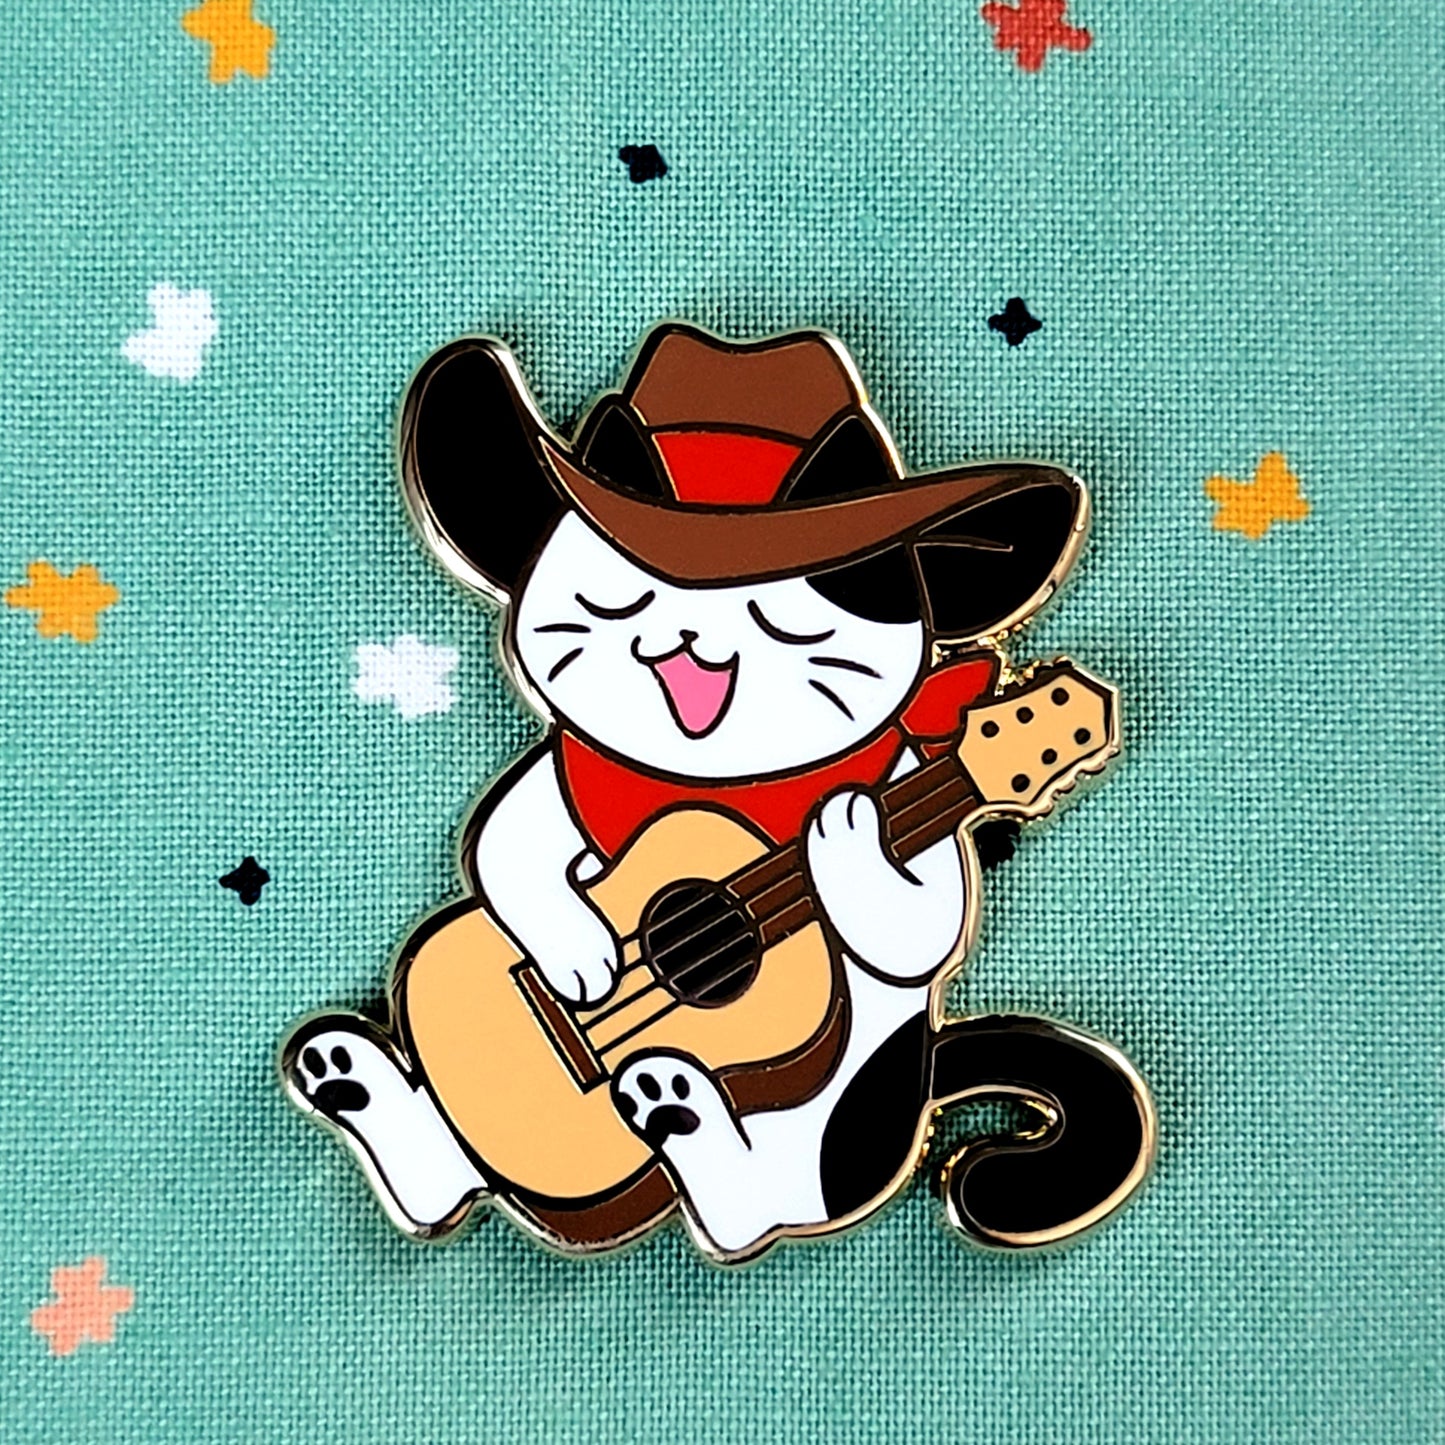 Cats and Cowboy Hats Pin and Sticker Collection